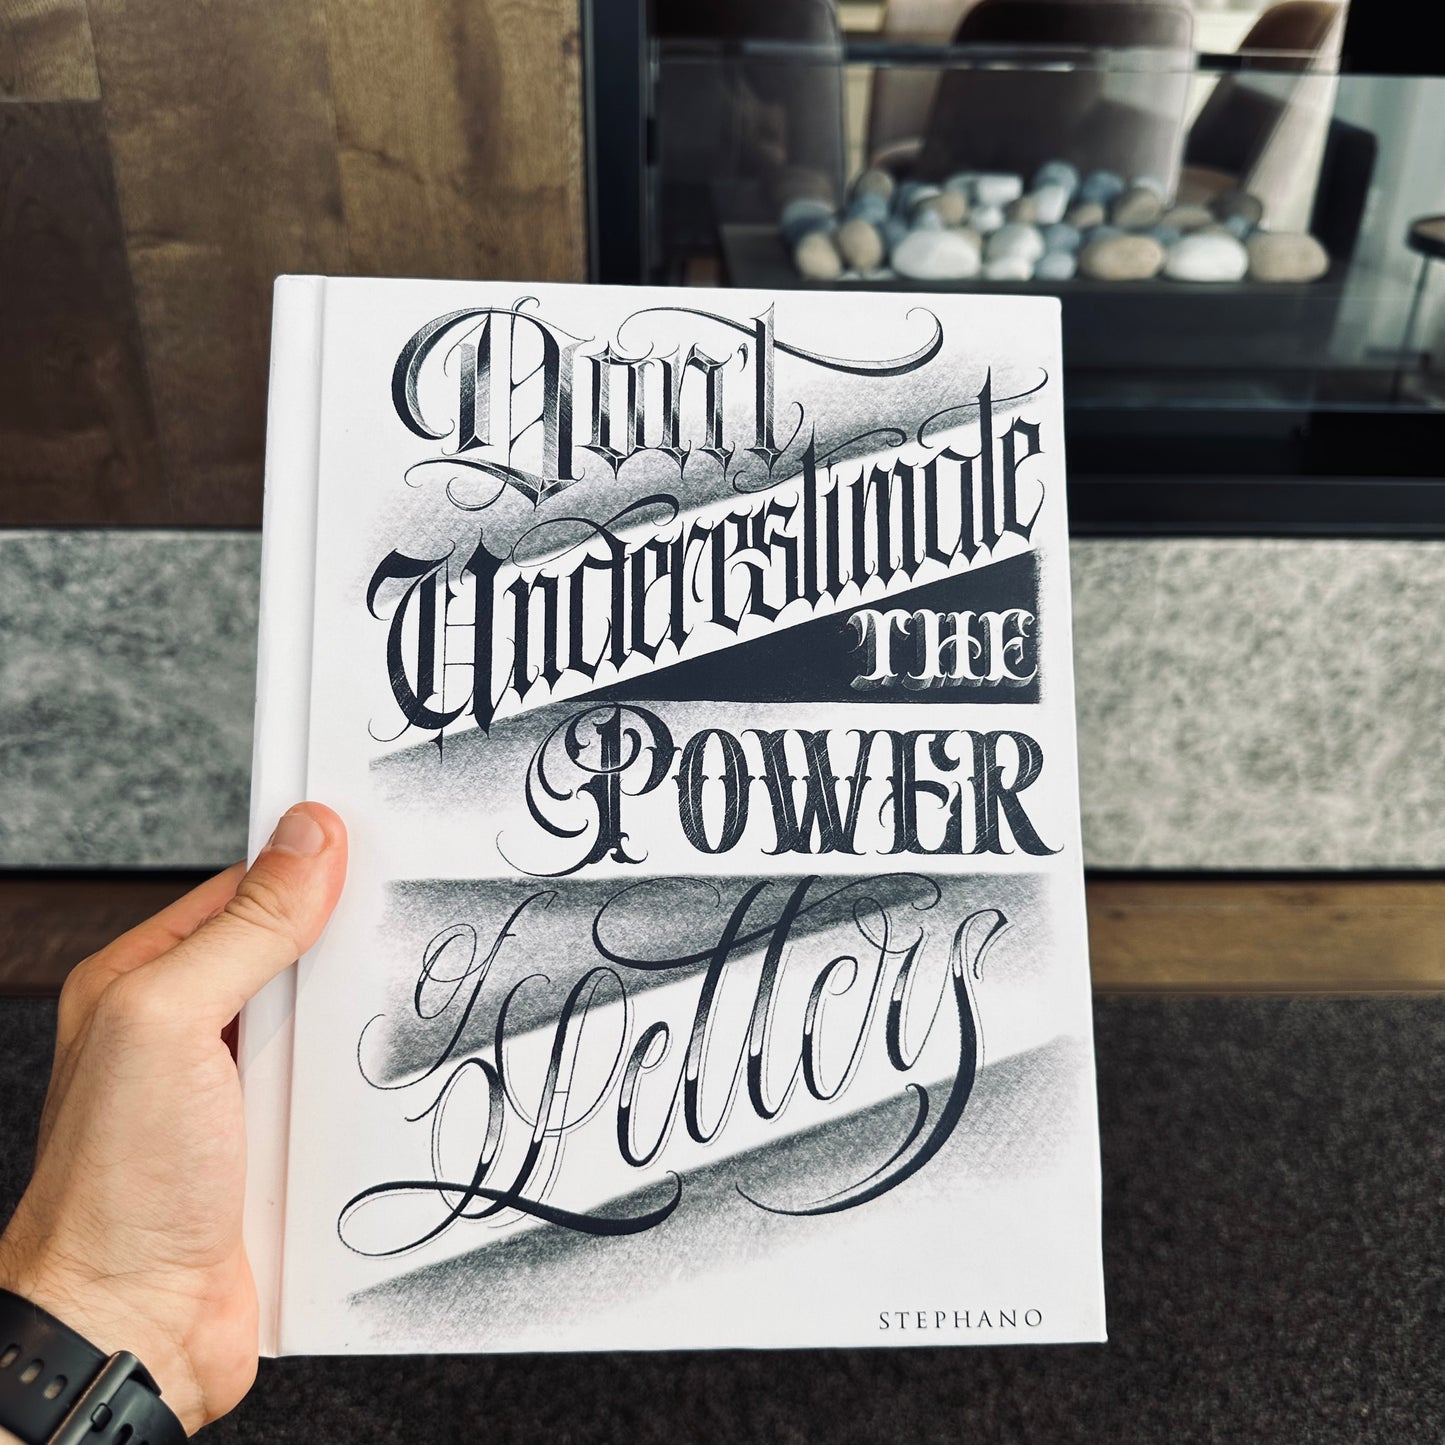 Don't Underestimate the Power of Letters (Hardcover Edition)